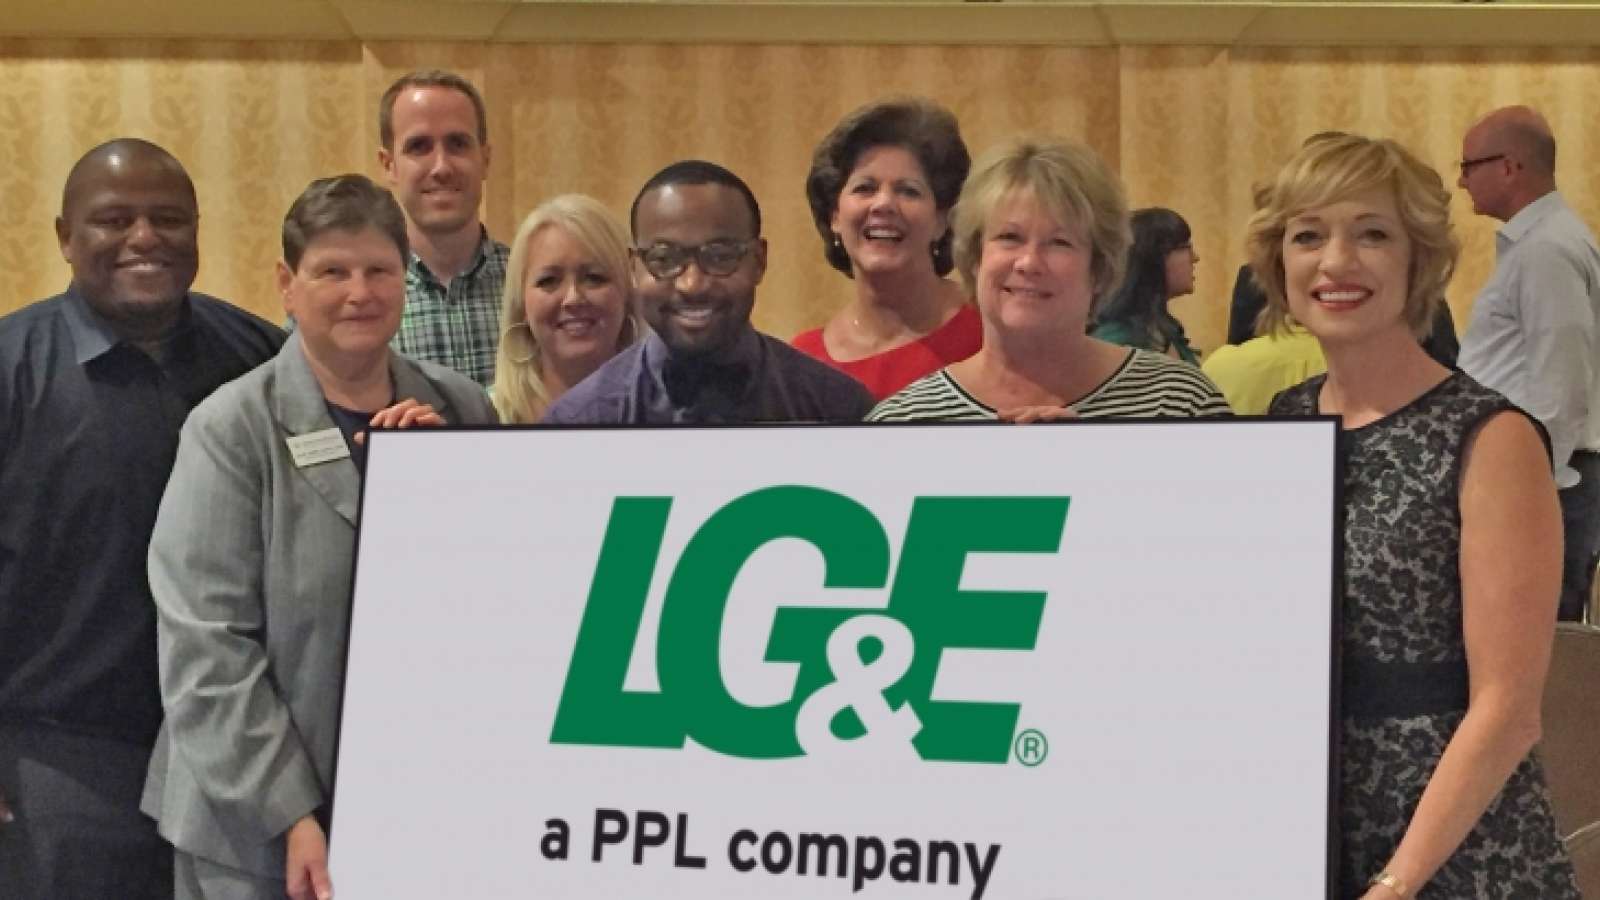 LG&E employees at a community event holding an LG&E sign